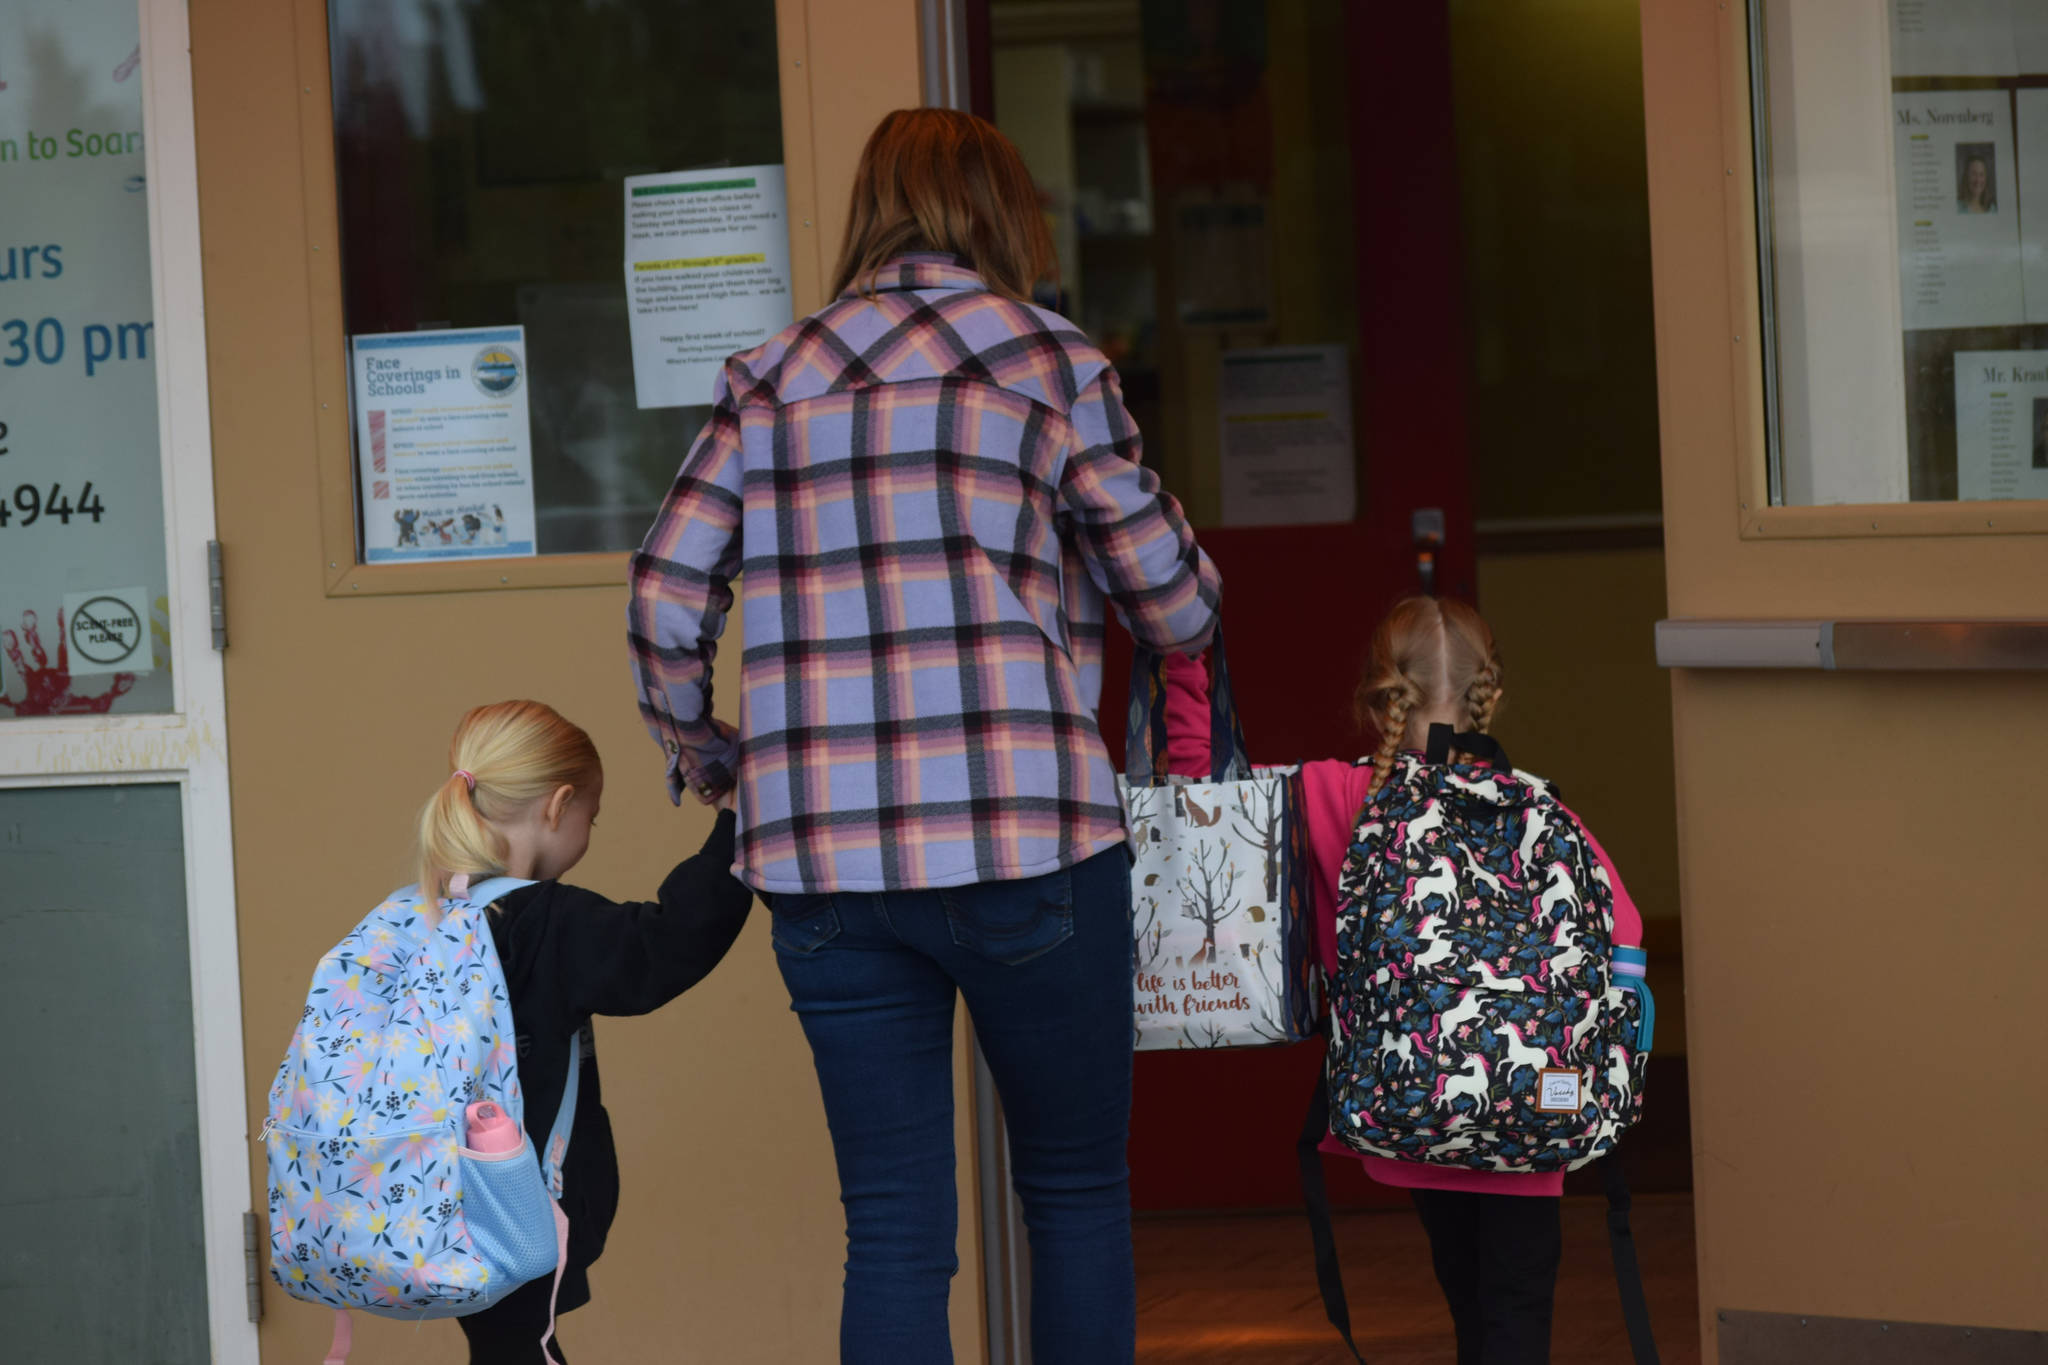 Katina Jacobson walks her daughters Evalyn, kindergarten, and Zoey, second grade, into Sterling Elementary on their first day of school on Tuesday, Aug. 17, 2021. (Camille Botello/Peninsula Clarion)